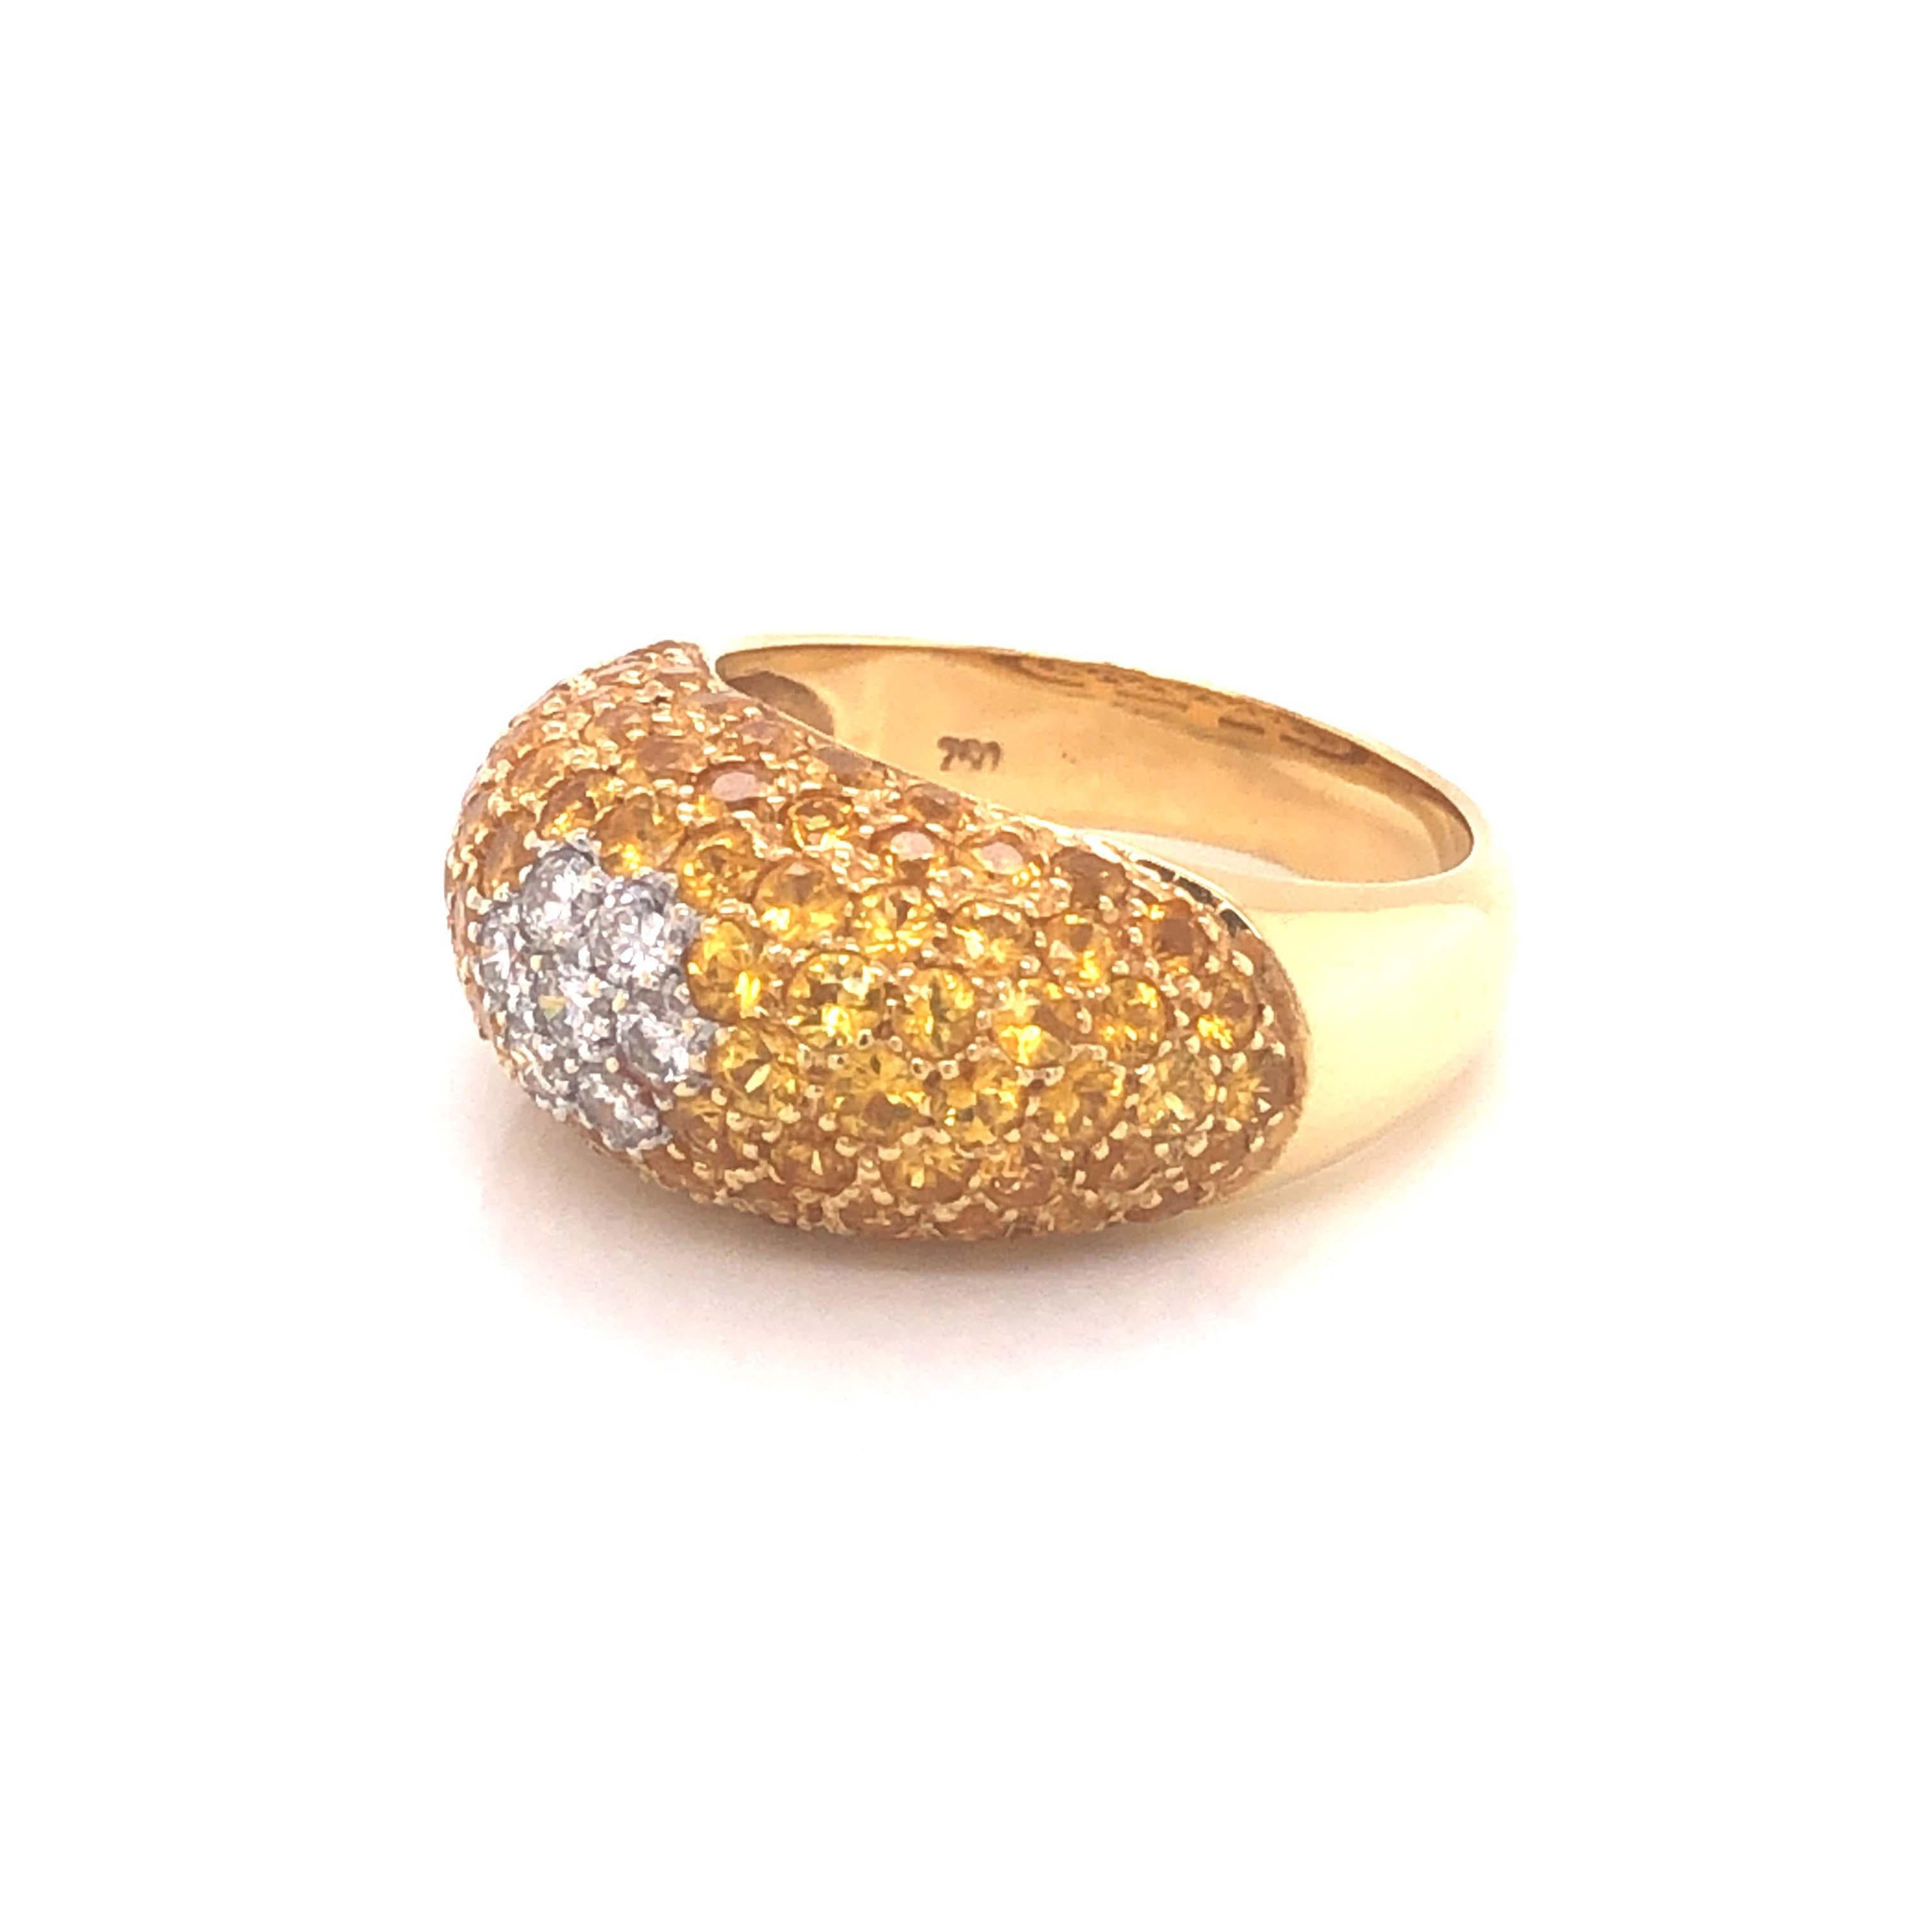 Le Vians Yellow Sapphire and Diamond Dome Ring, 18k Yellow Gold In Excellent Condition For Sale In Honolulu, HI